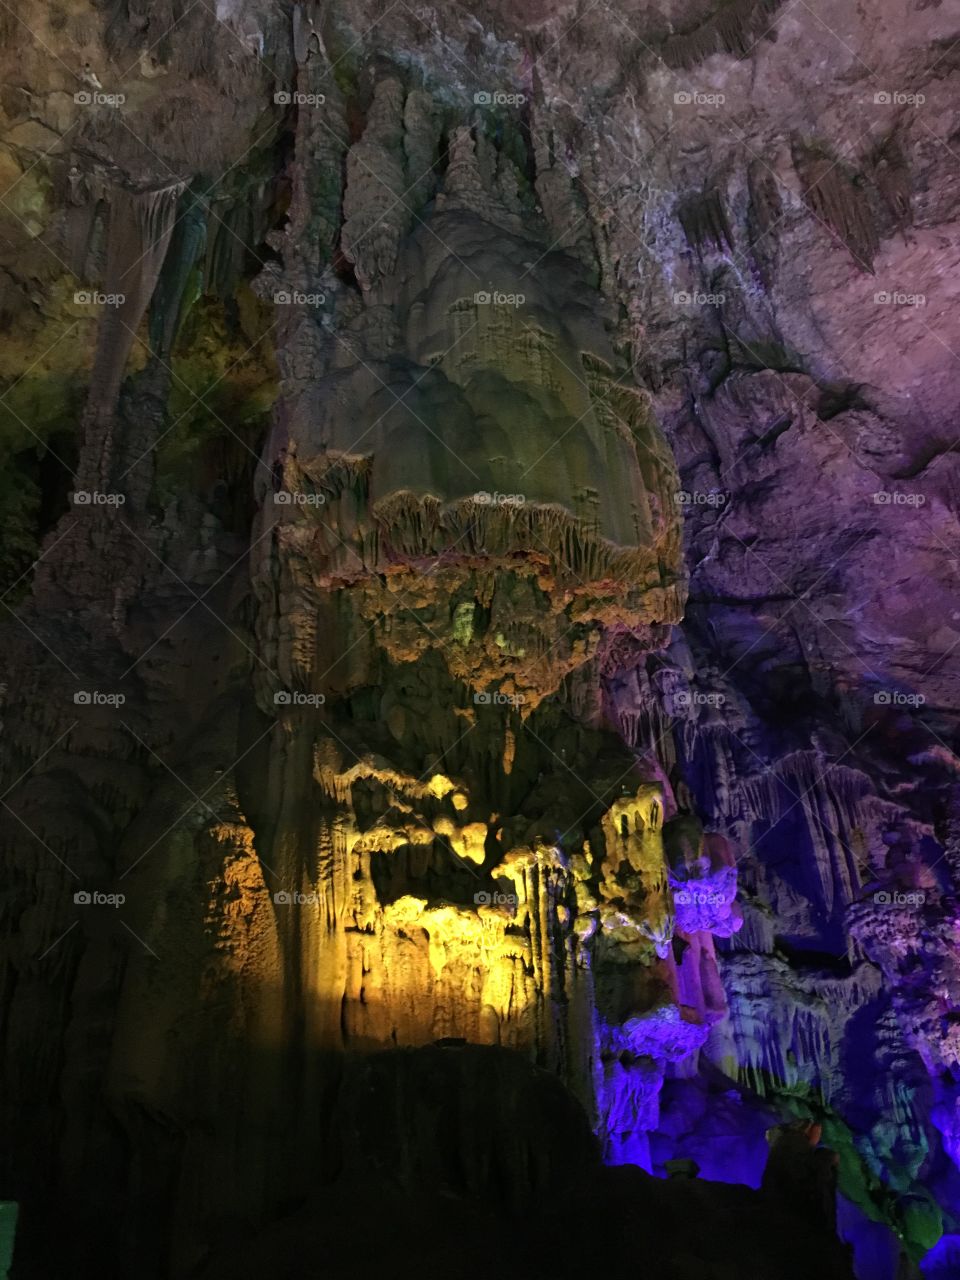 Karst caves in Guilin,The most famous of the two caves is Reed Flute Cave and Silver Cave.